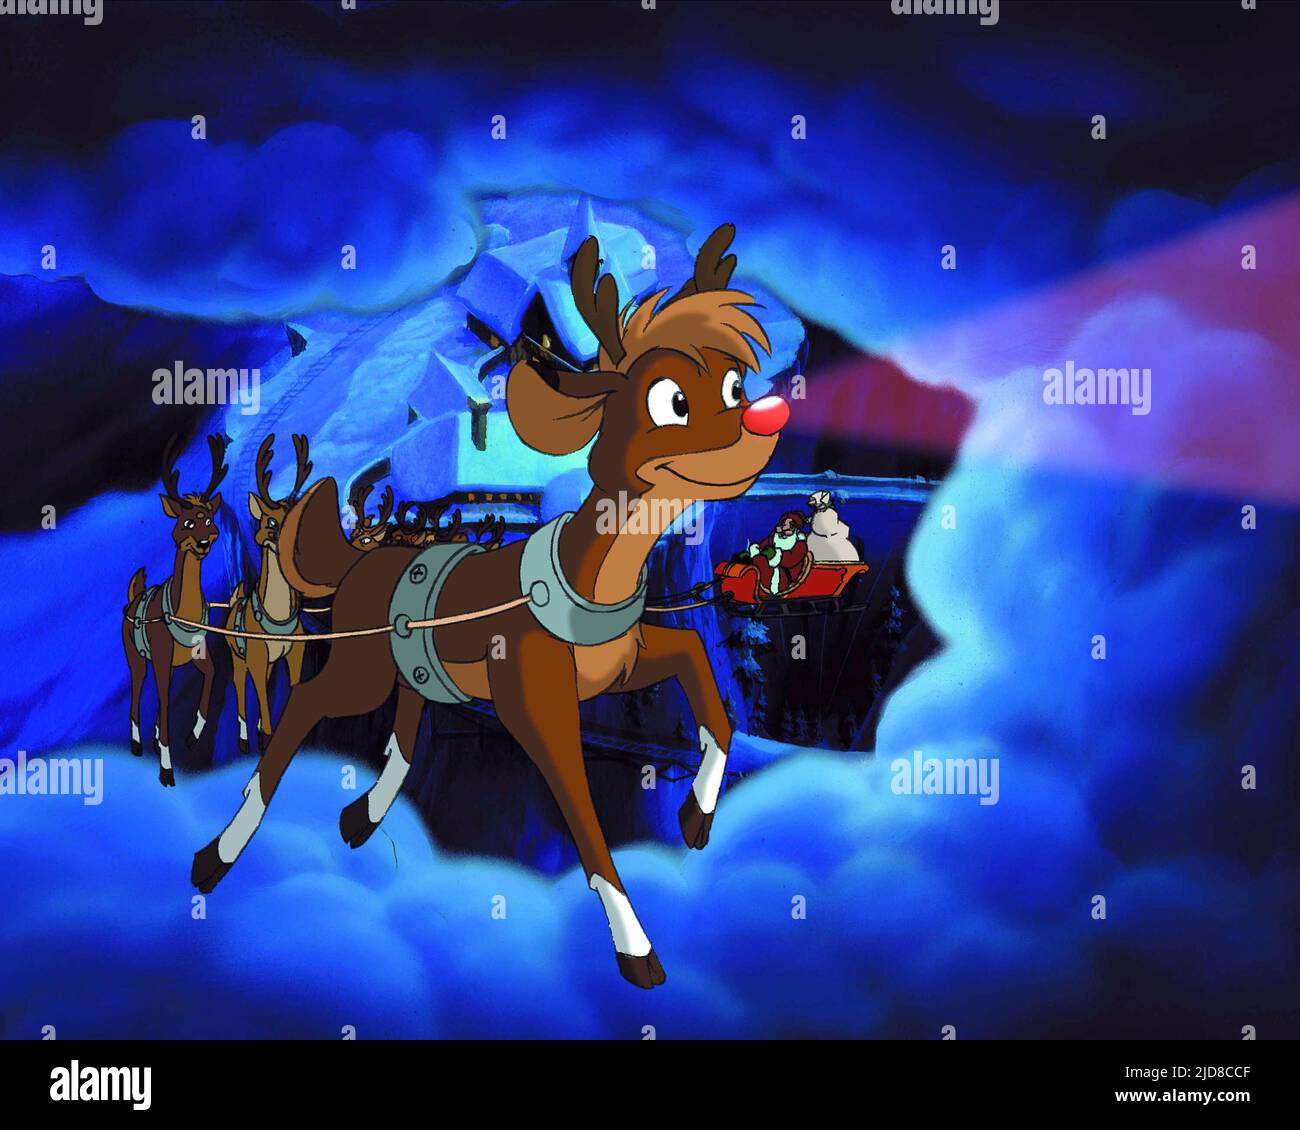 RUDOLPH, RUDOLPH THE RED-NOSED REINDEER, 1998 Stock Photo